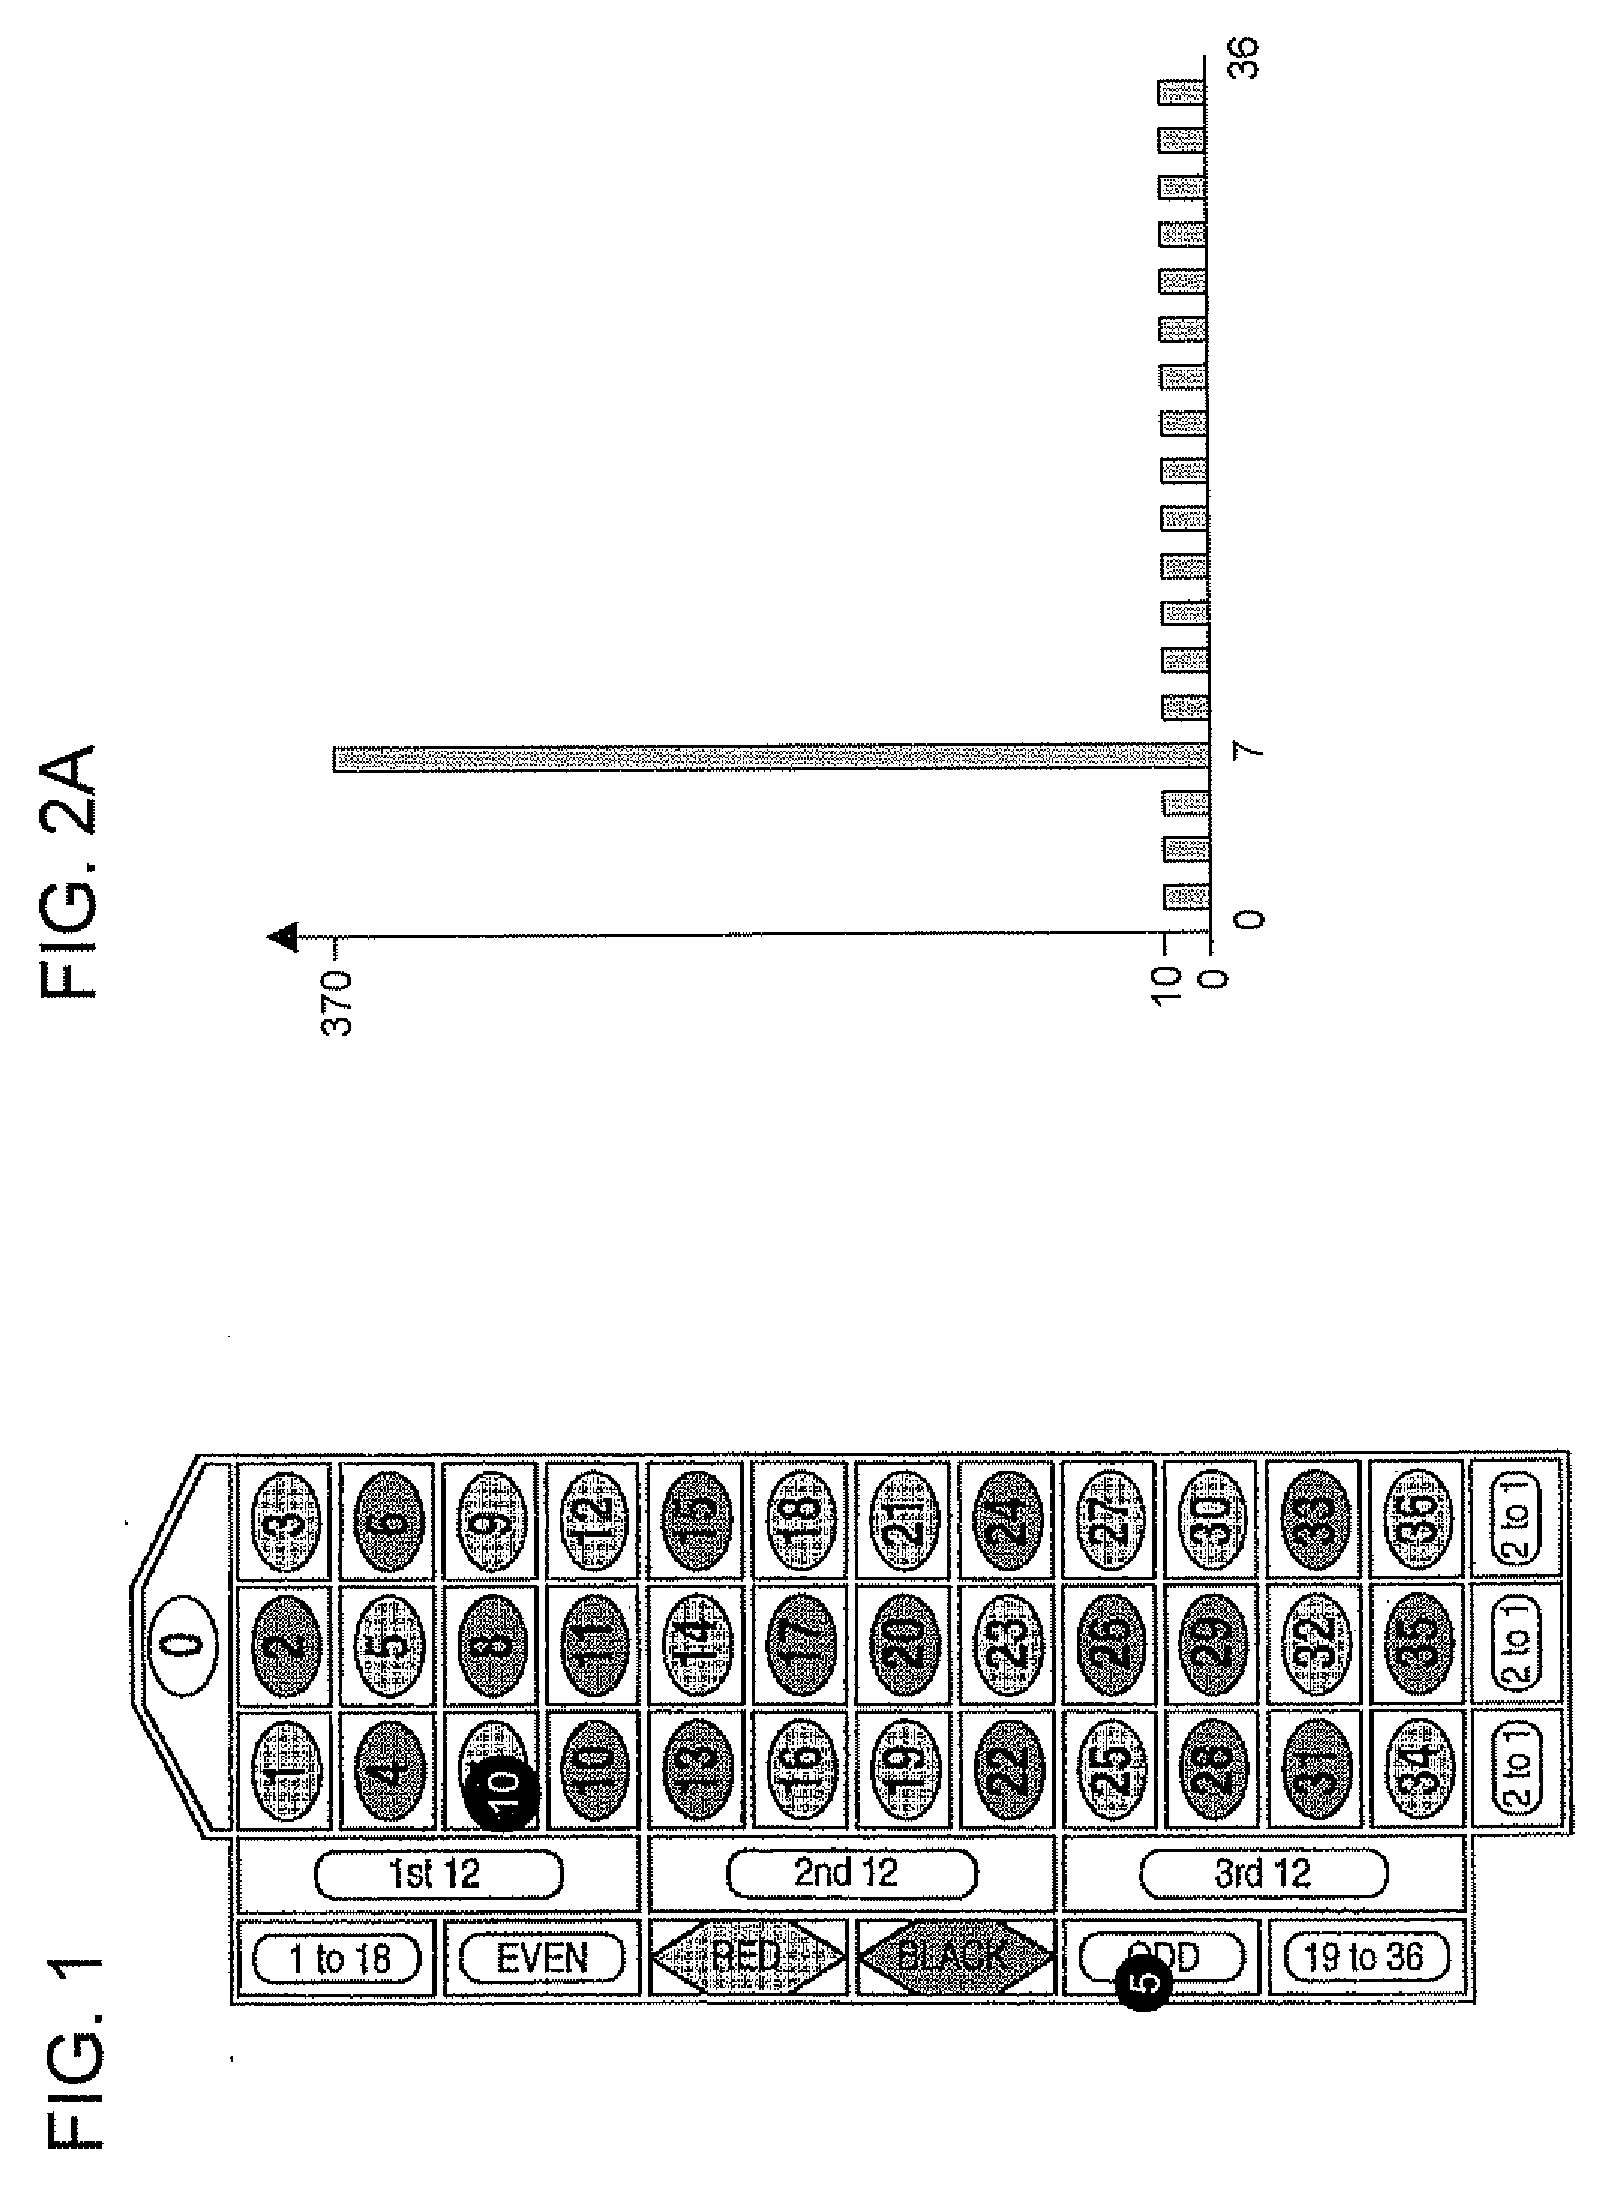 System, method and graphic user interface for simulated gaming experience based on financial transactions